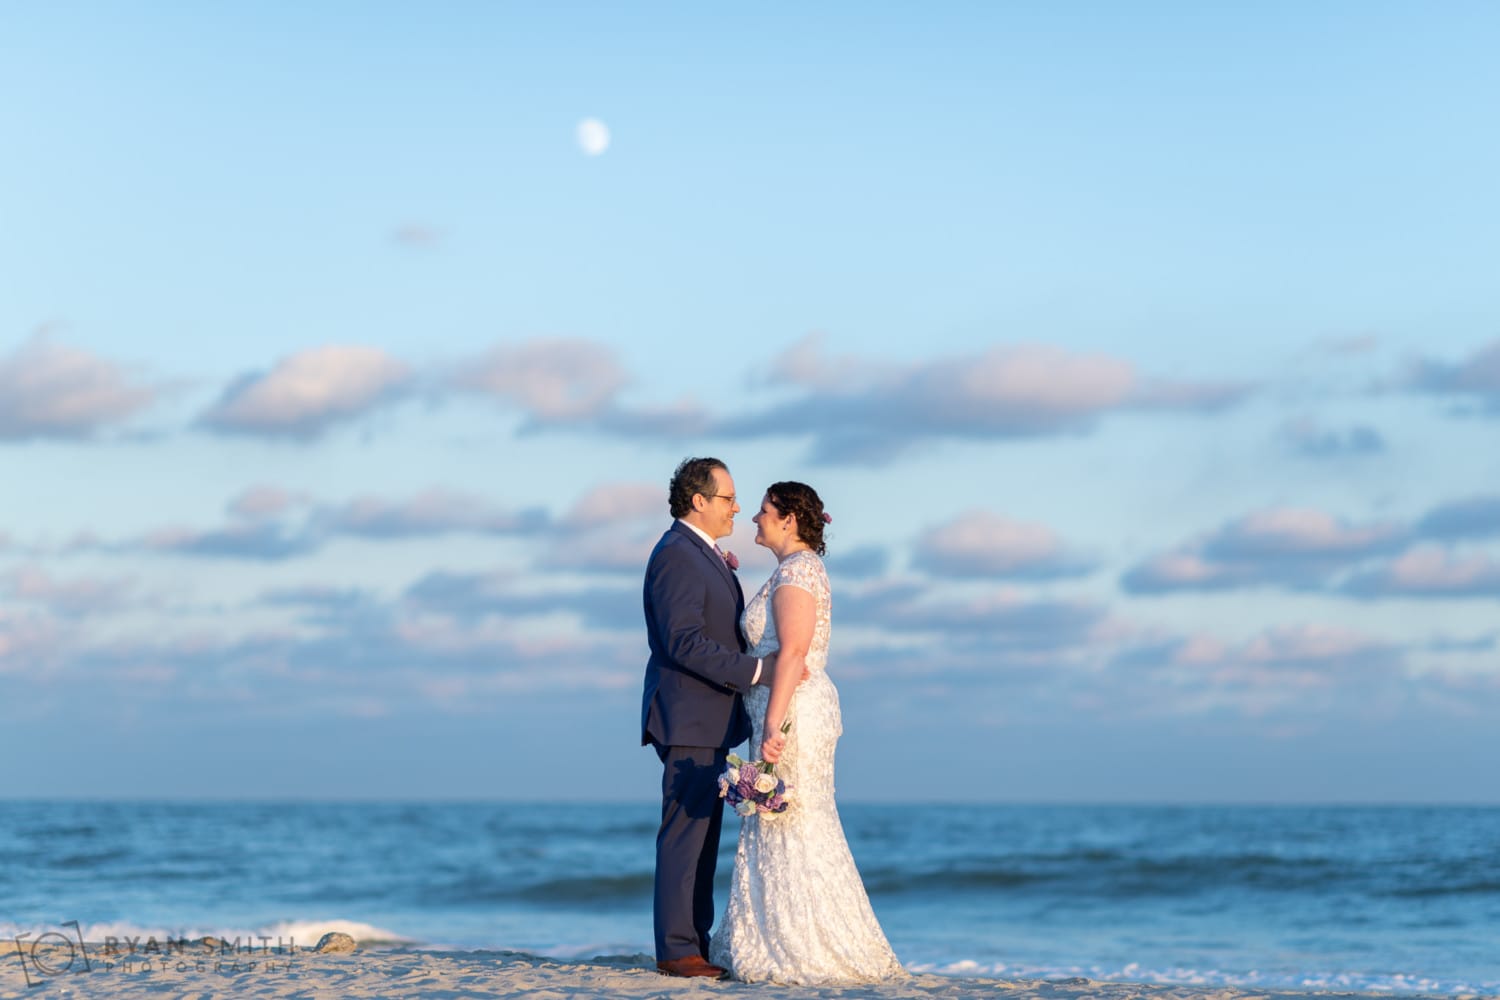 Looking into each other eyes in front of the full moon - North Beach Plantation